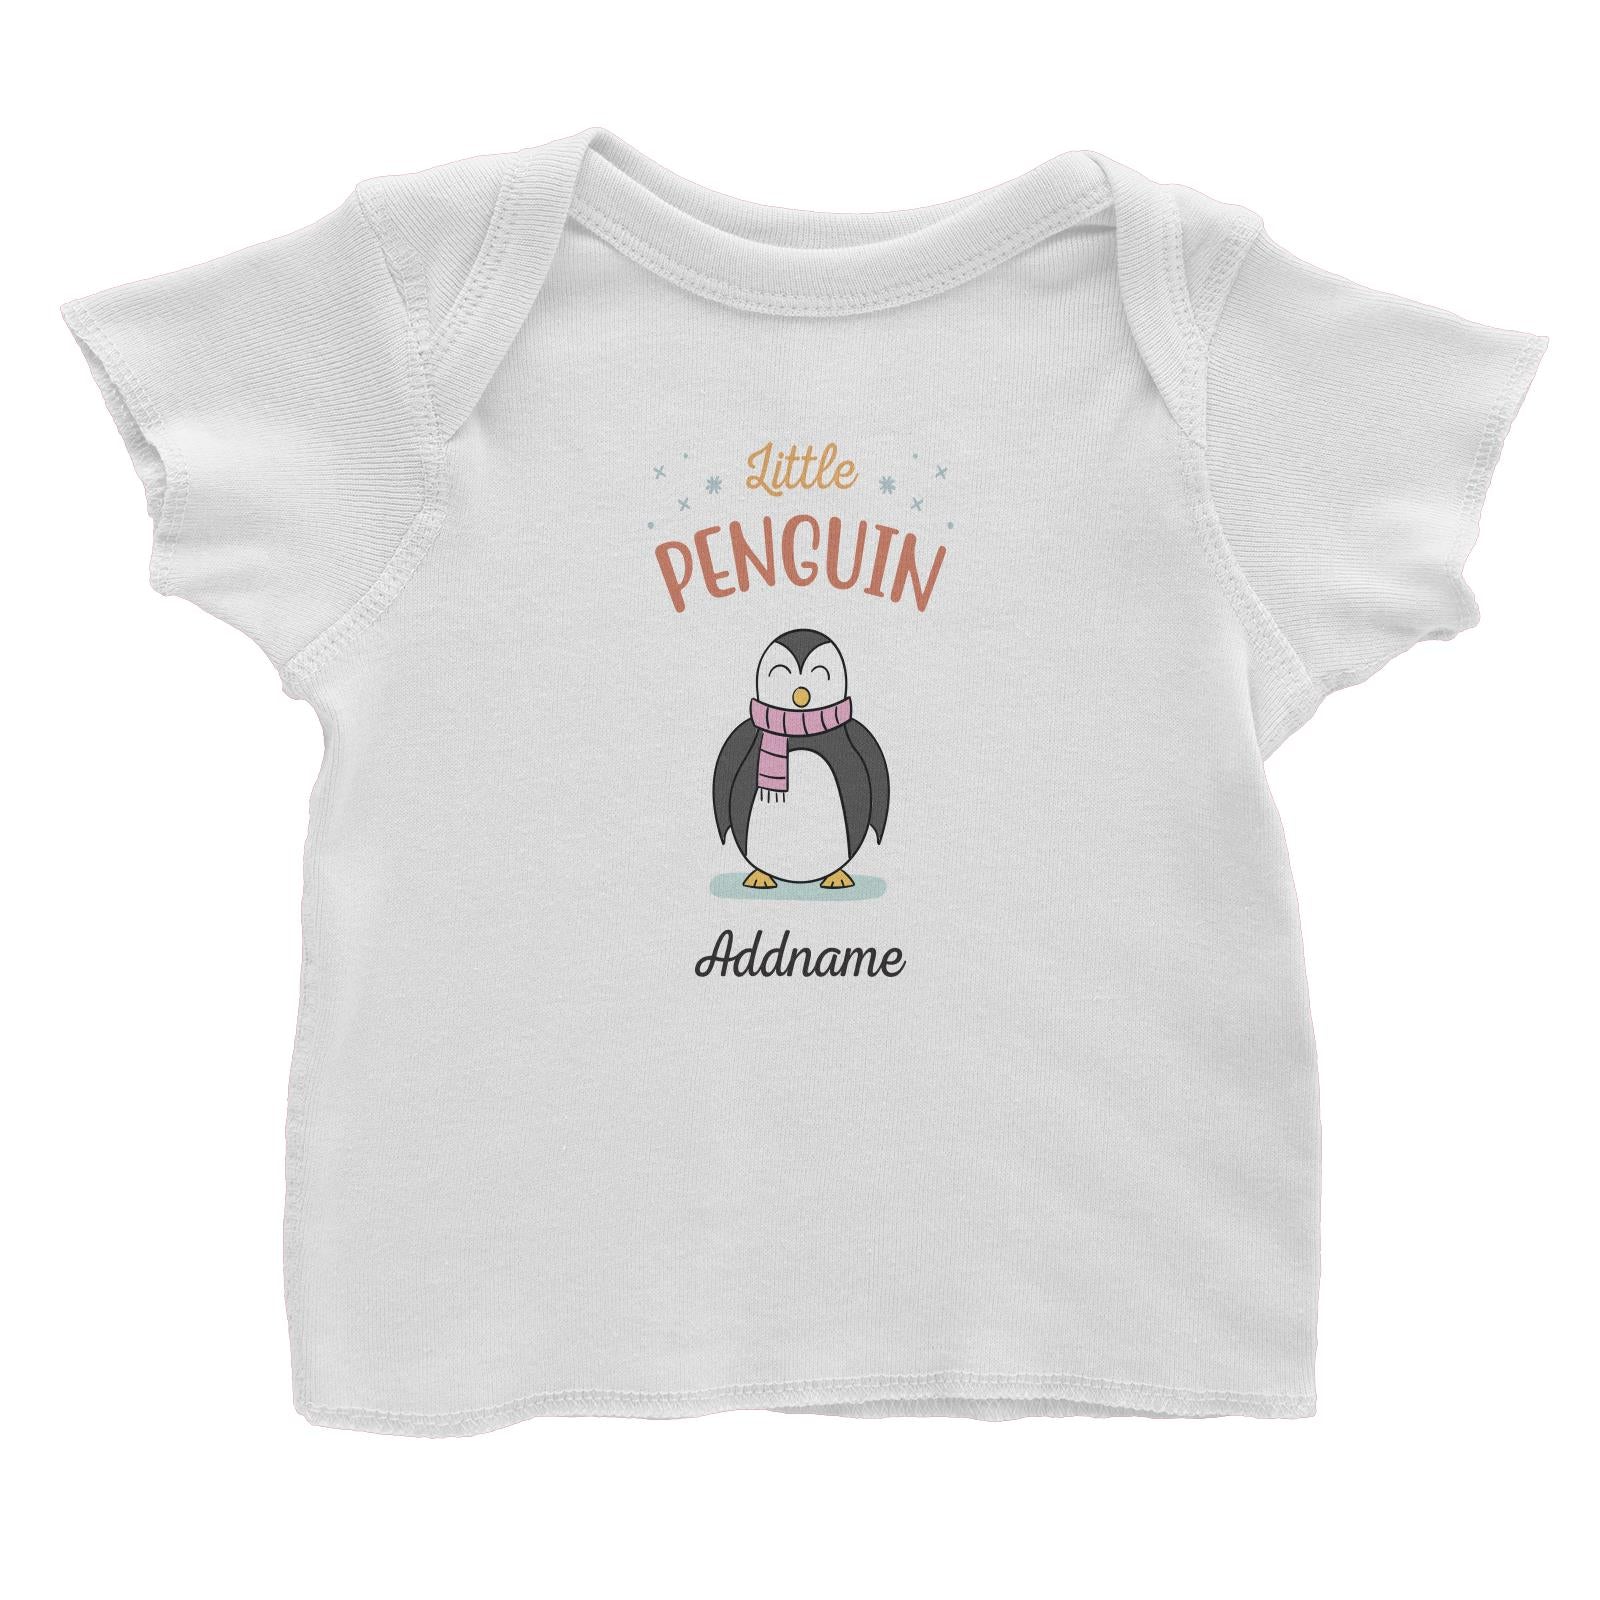 Penguin Family Little Penguin With Scarf Addname Baby T-Shirt